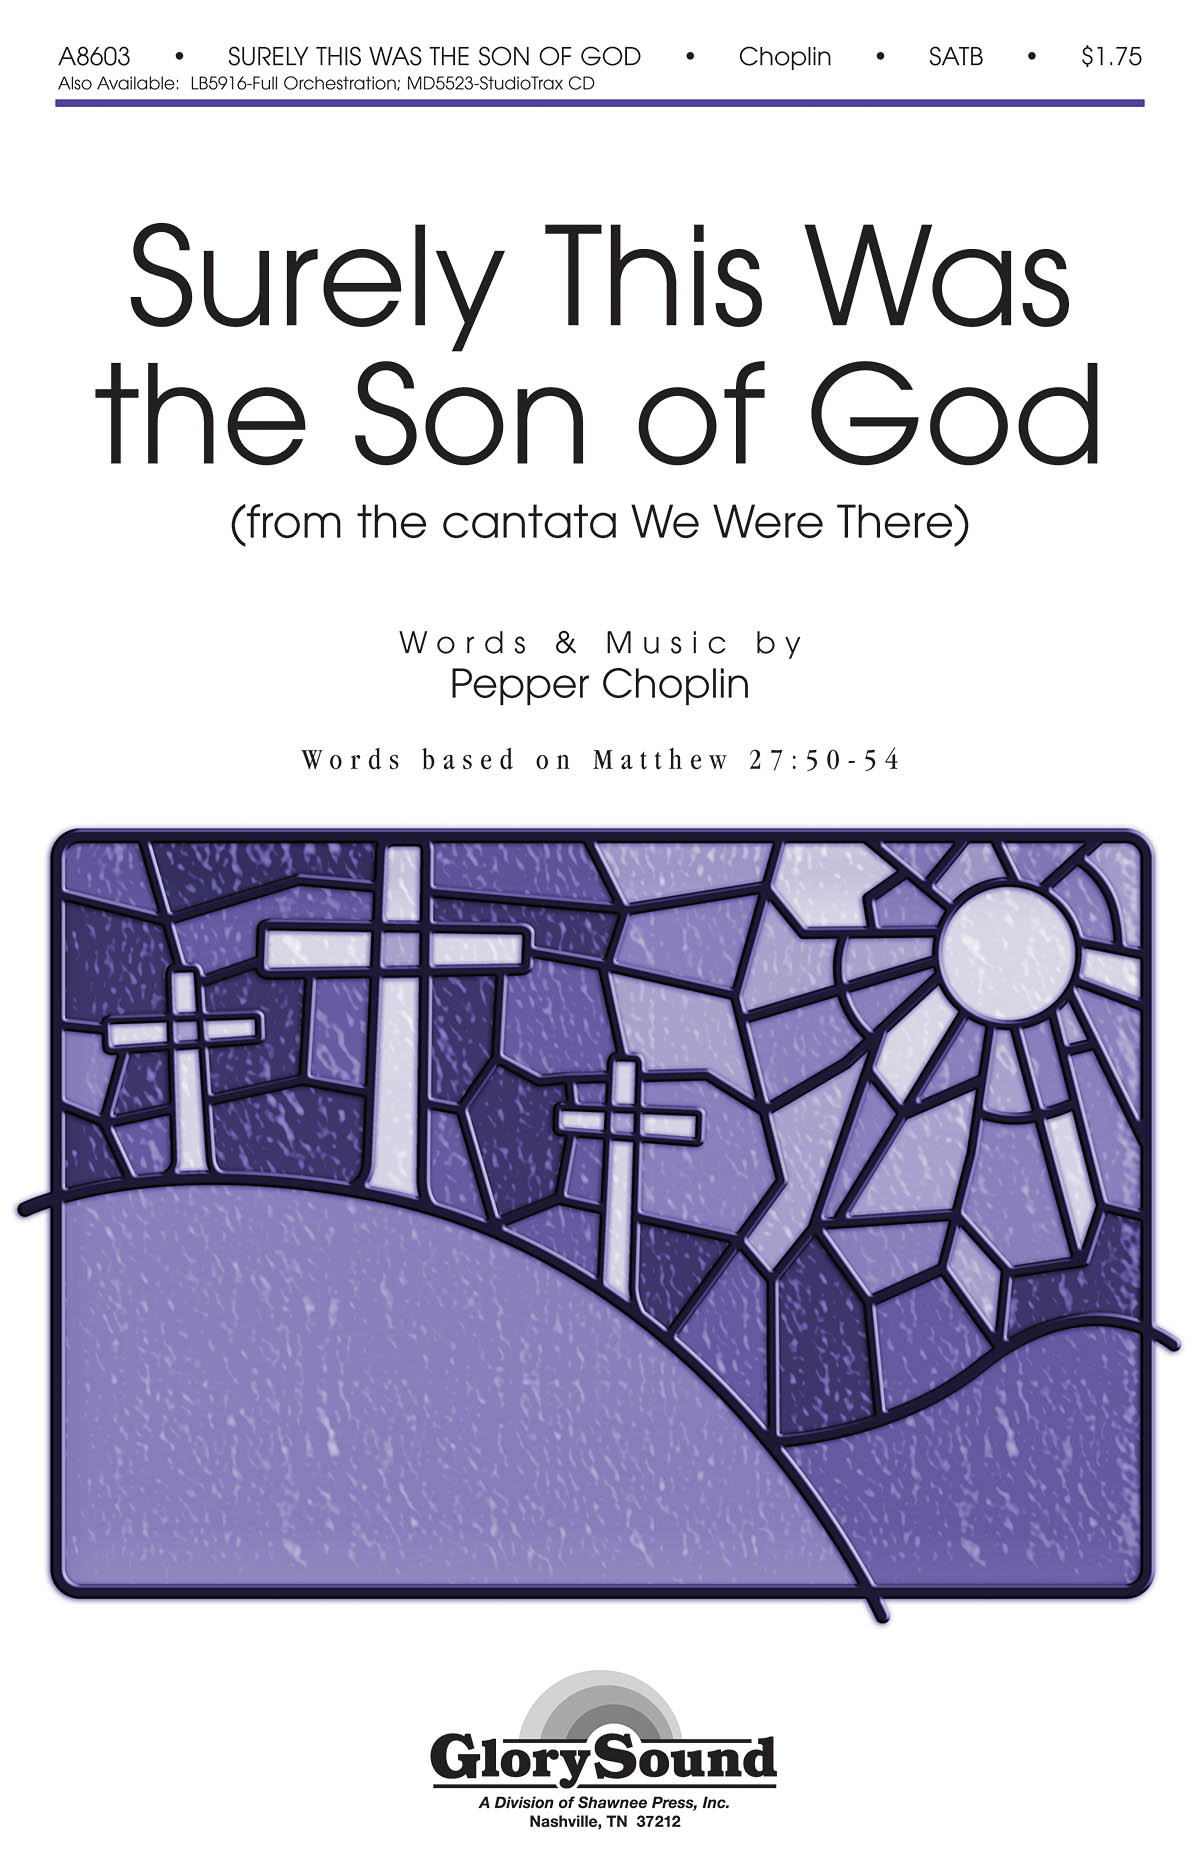 Pepper Choplin: Surely This Was the Son of God: SATB: Vocal Score